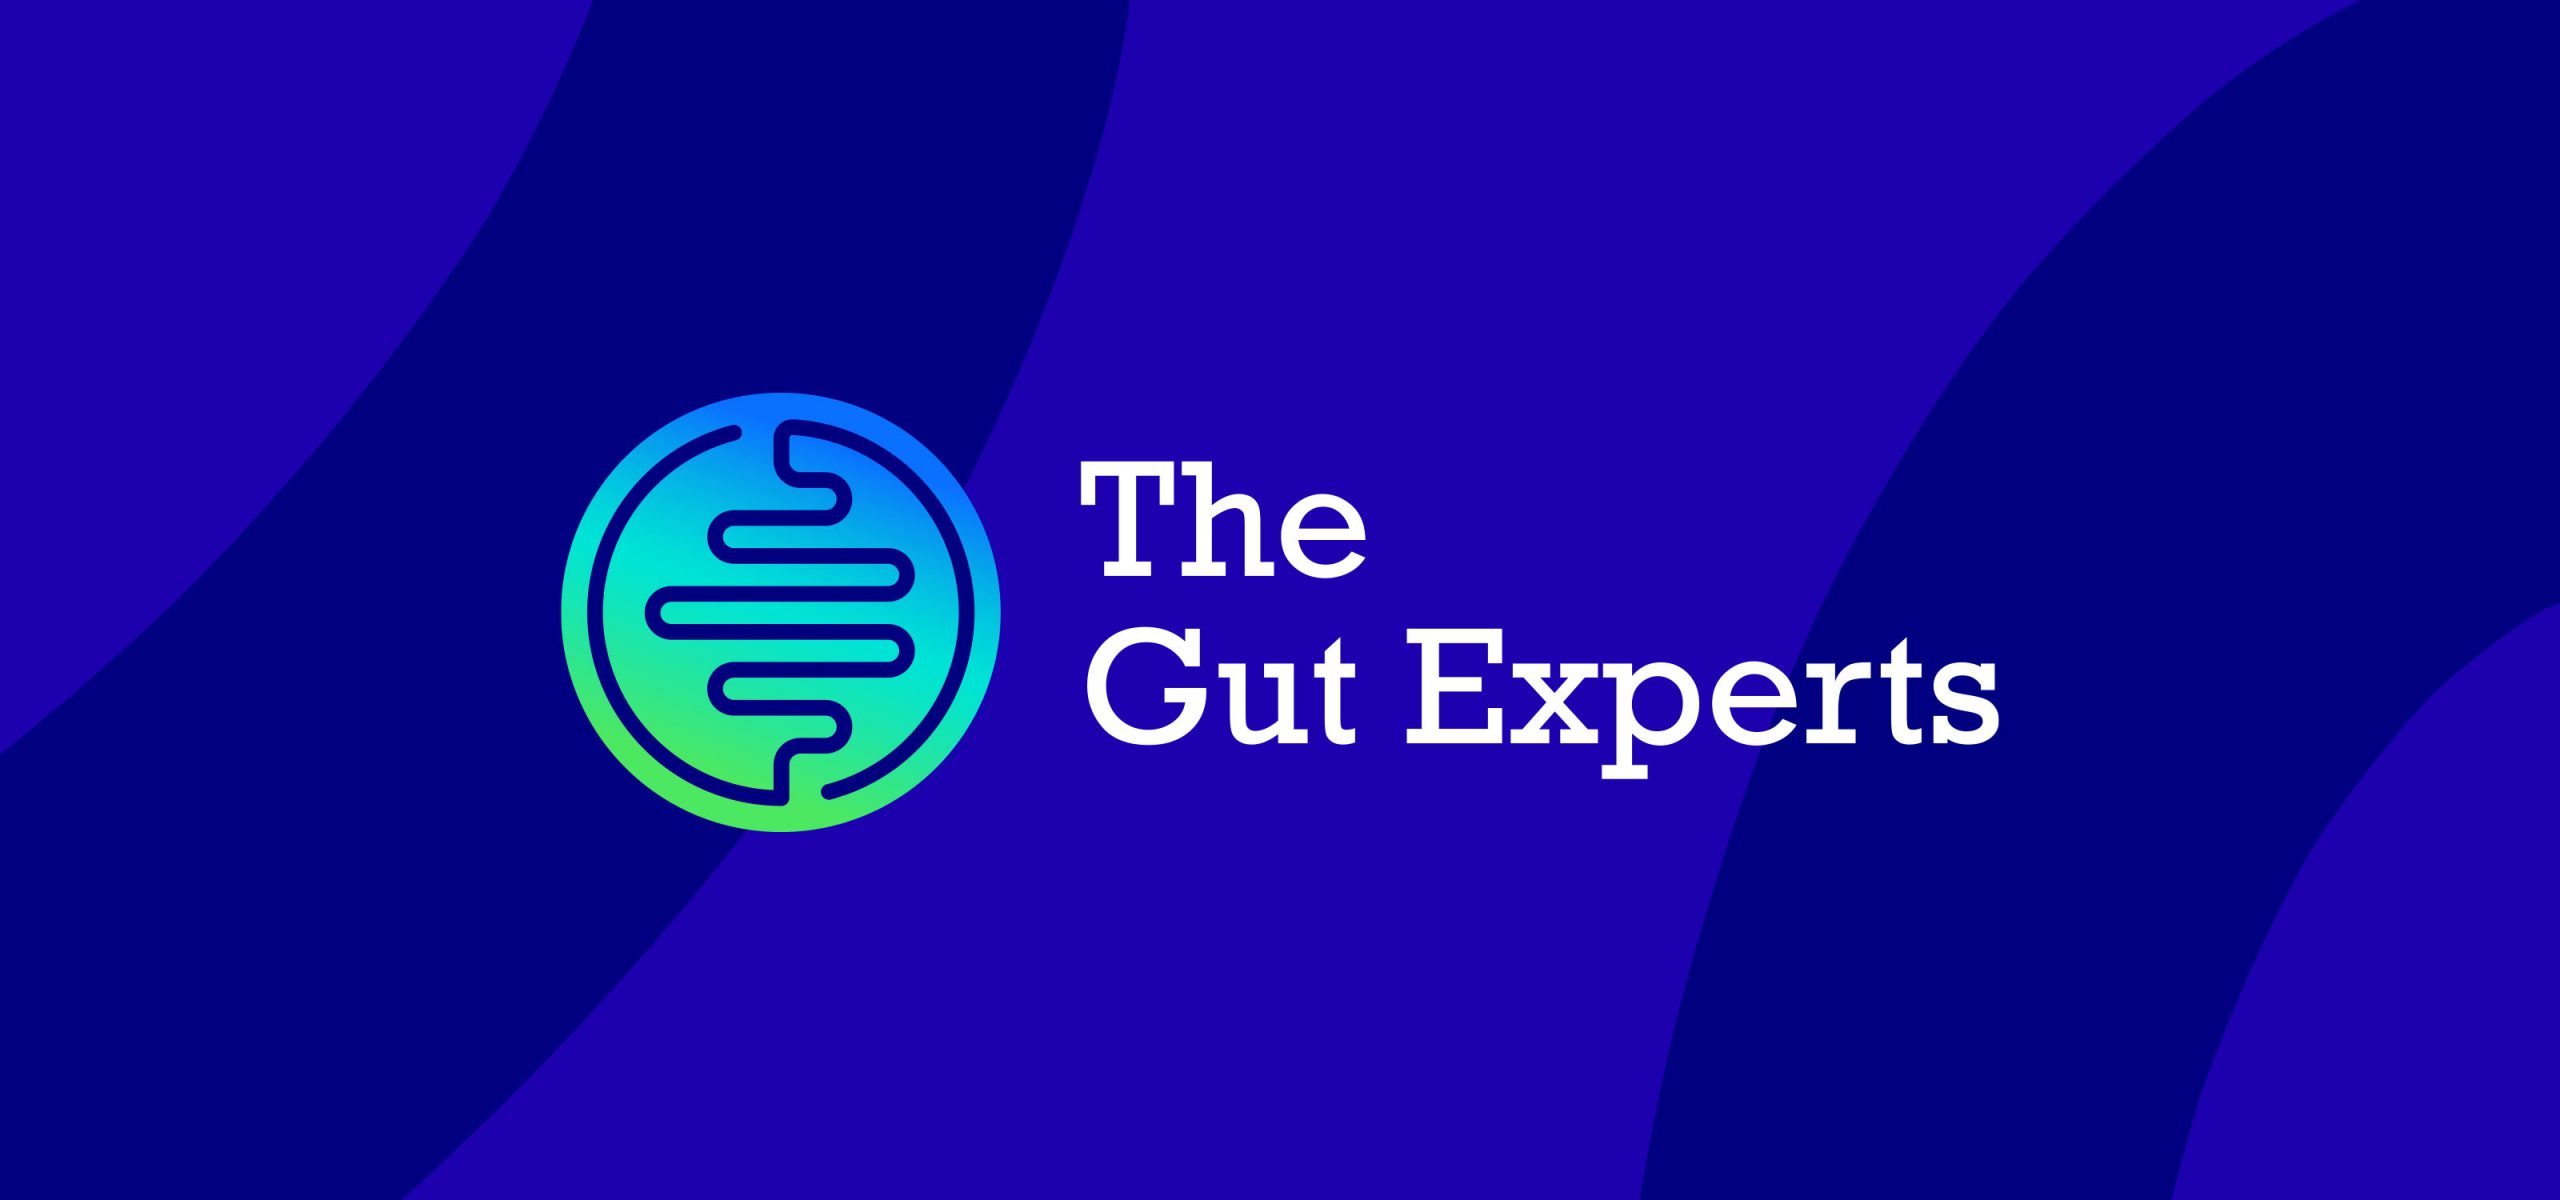 The Gut Experts Brand scaled